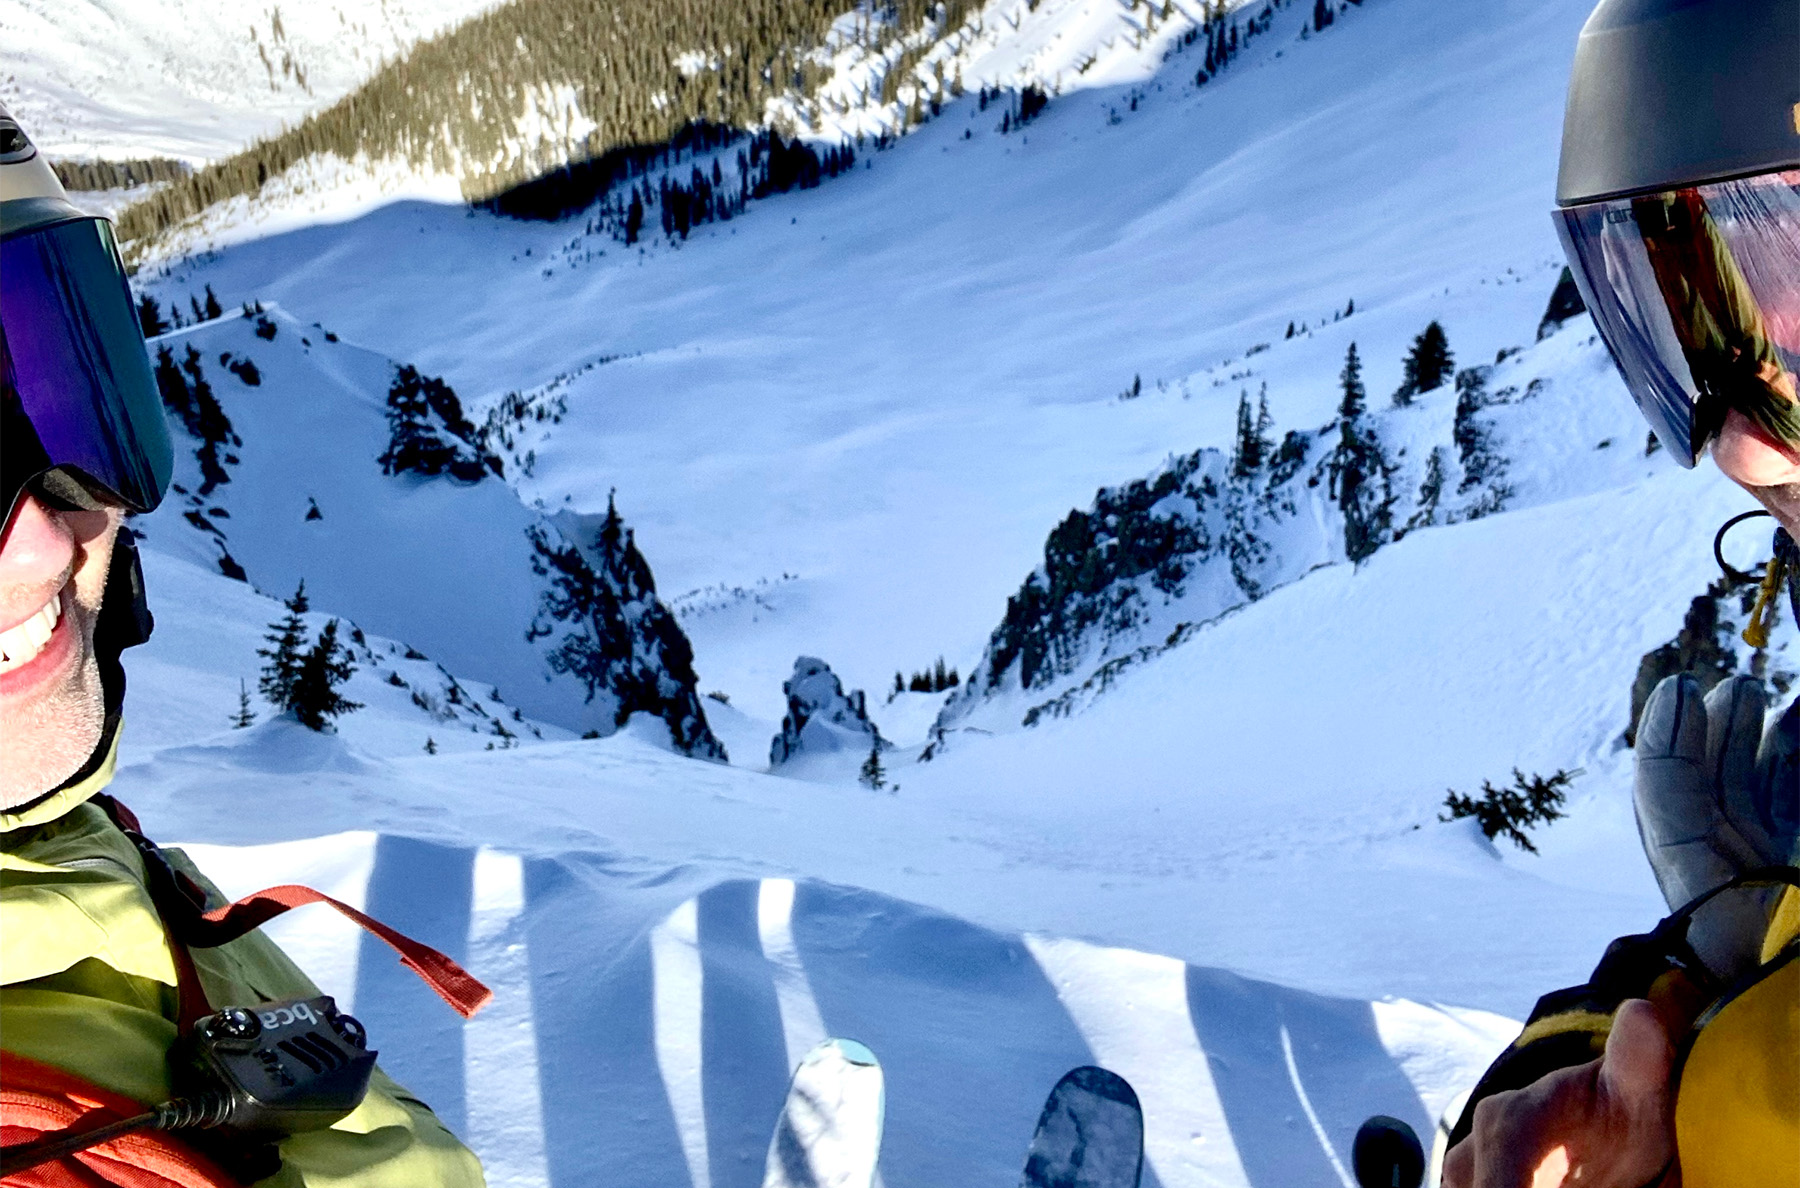 Jonathan & Rob in the Crested Butte backcountry